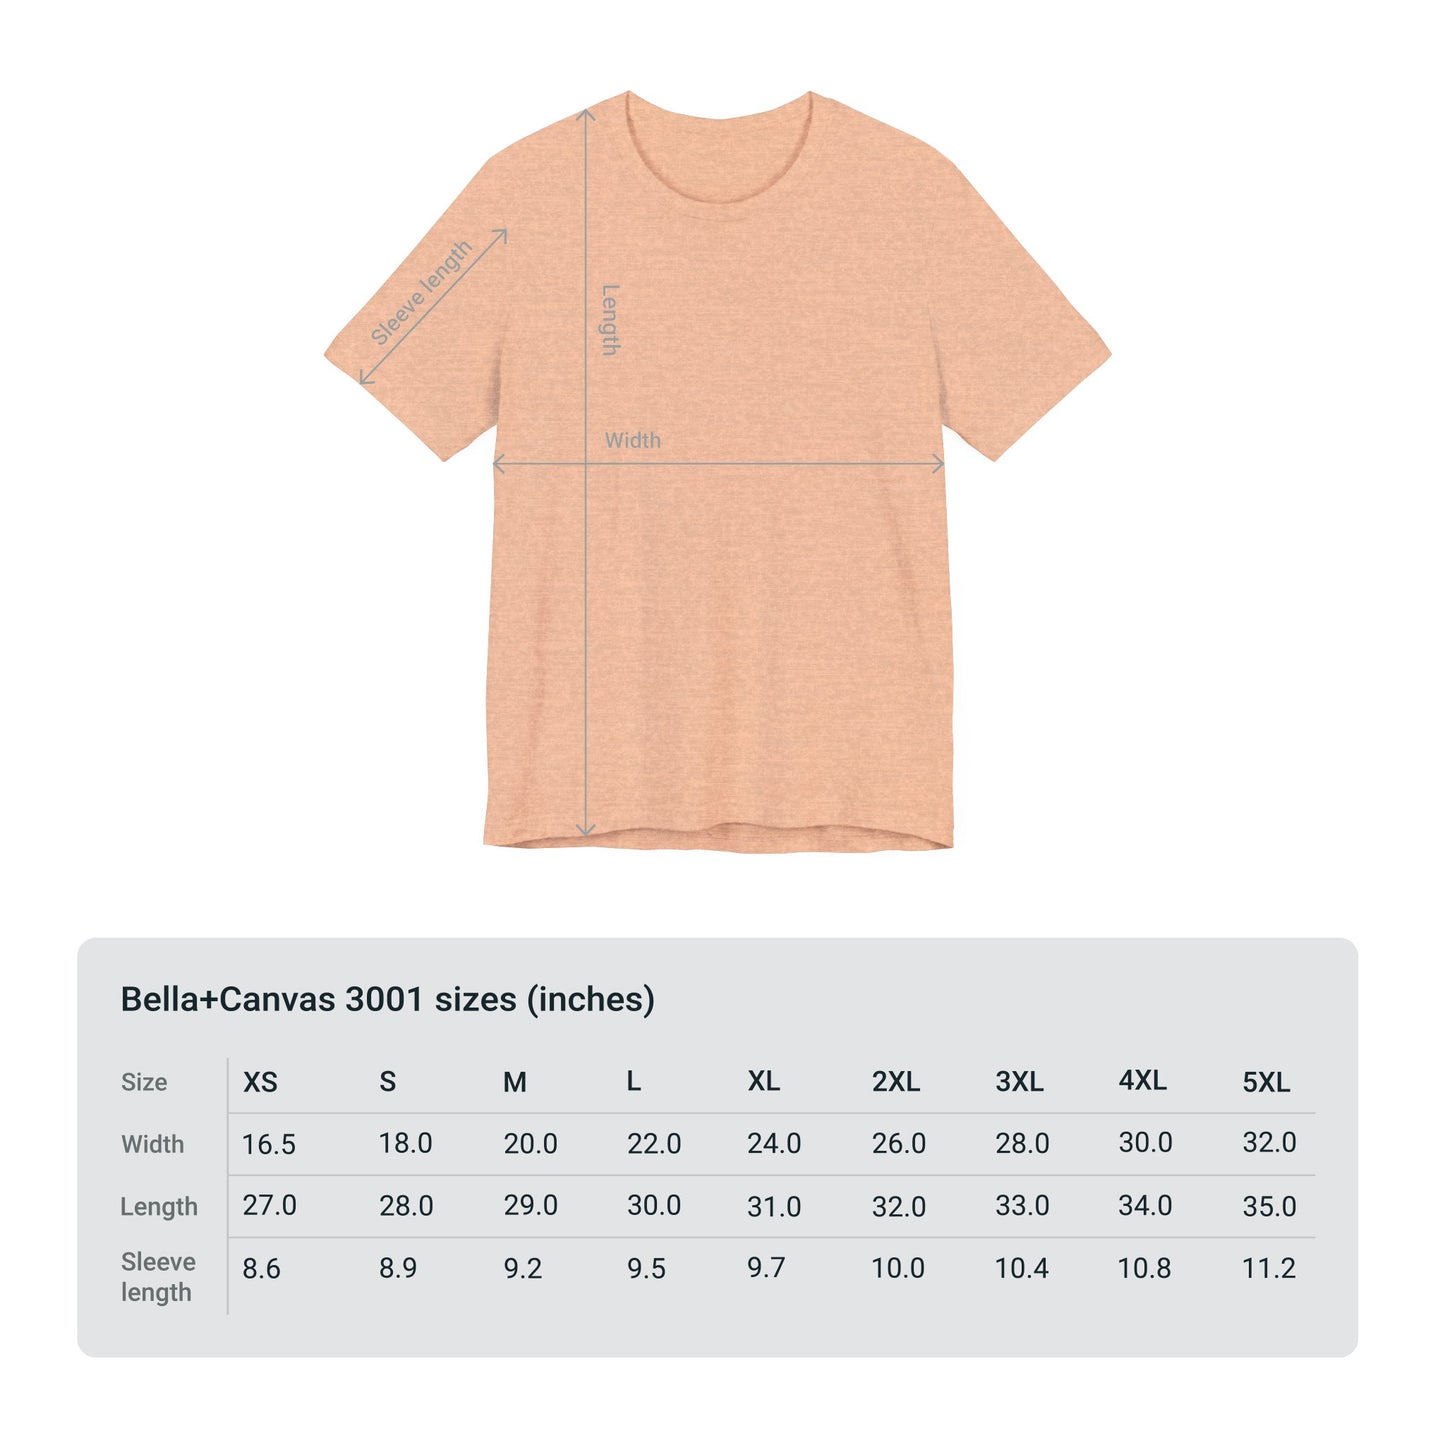 Peach-colored Printify Bella + Canvas 3001 voting women's t-shirt with size chart showing measurements from xs to 5xl.